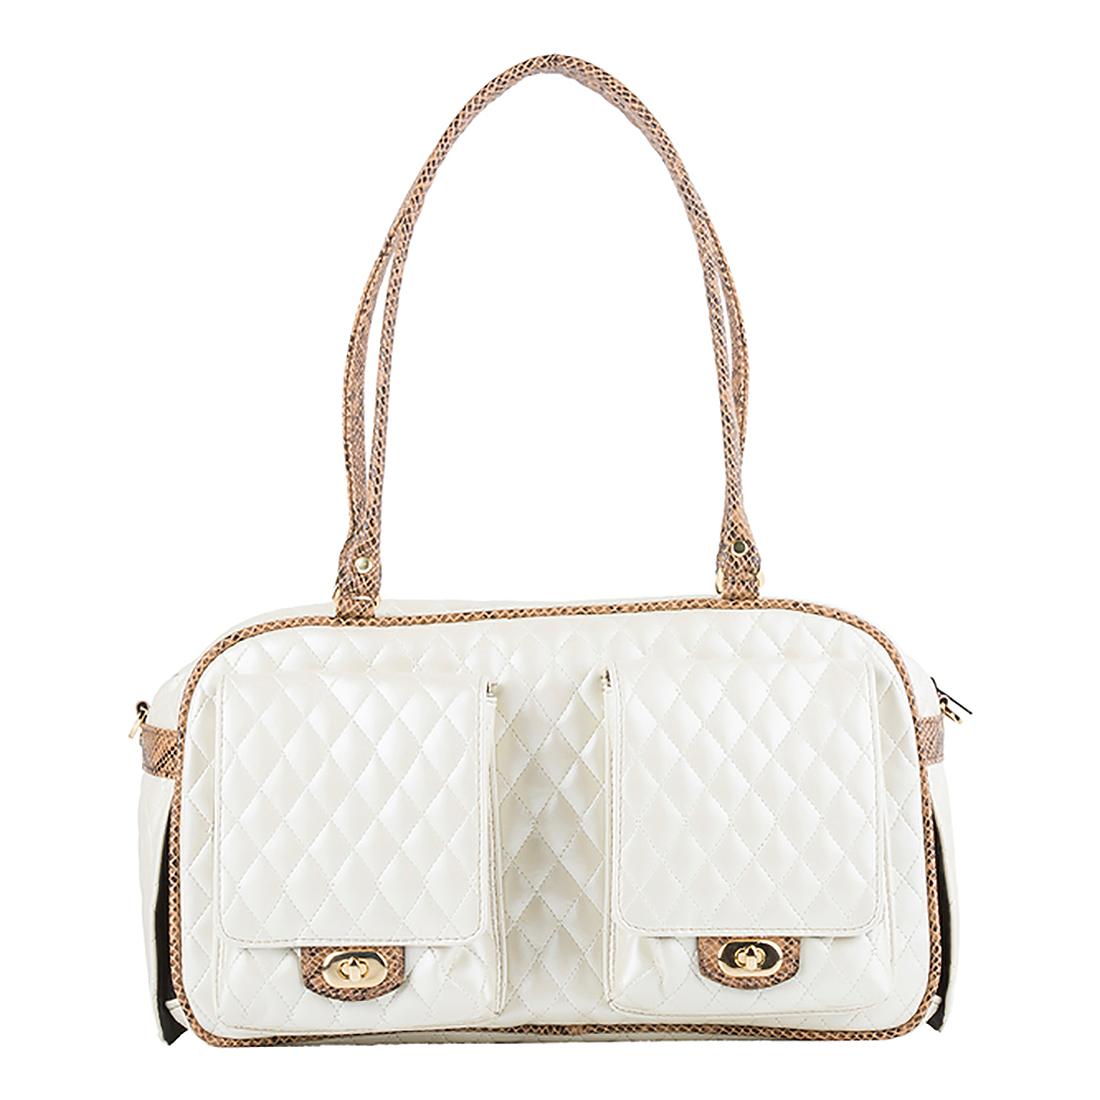 Petote Marlee Quilted Dog Carrier - Ivory with Snake Trim